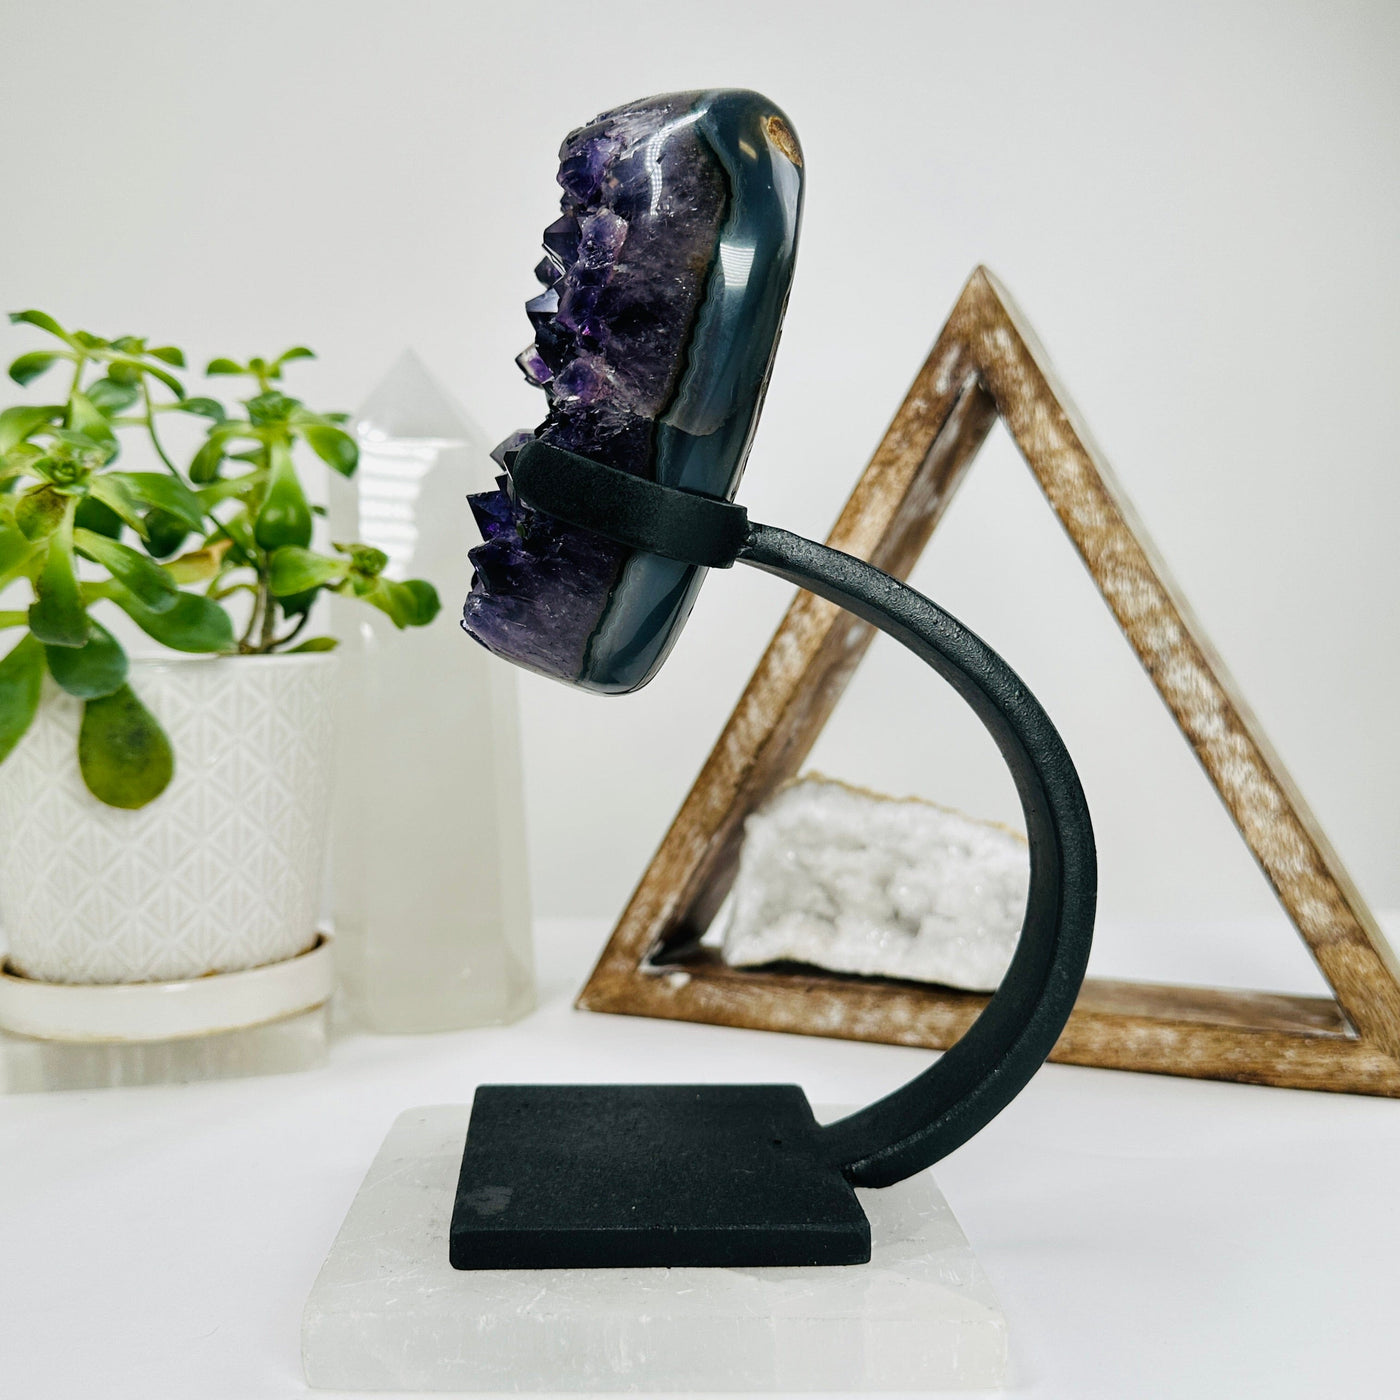 polished amethyst on stand with decorations in the background